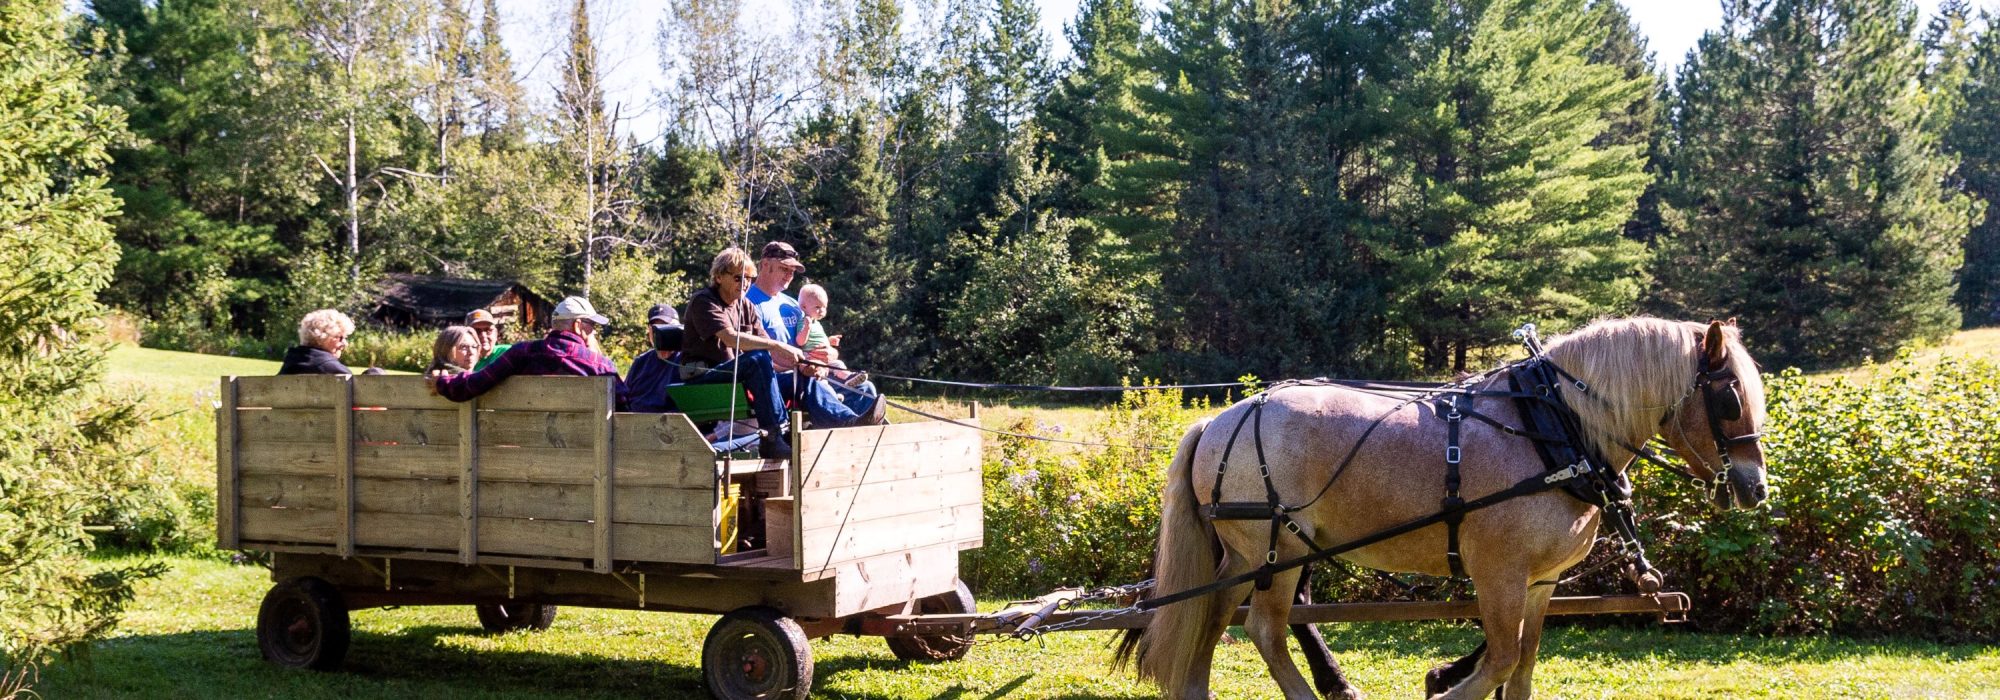 Draft horses pull a wooden wagon at the Wirtanen Farm Festival in Makinen, MN